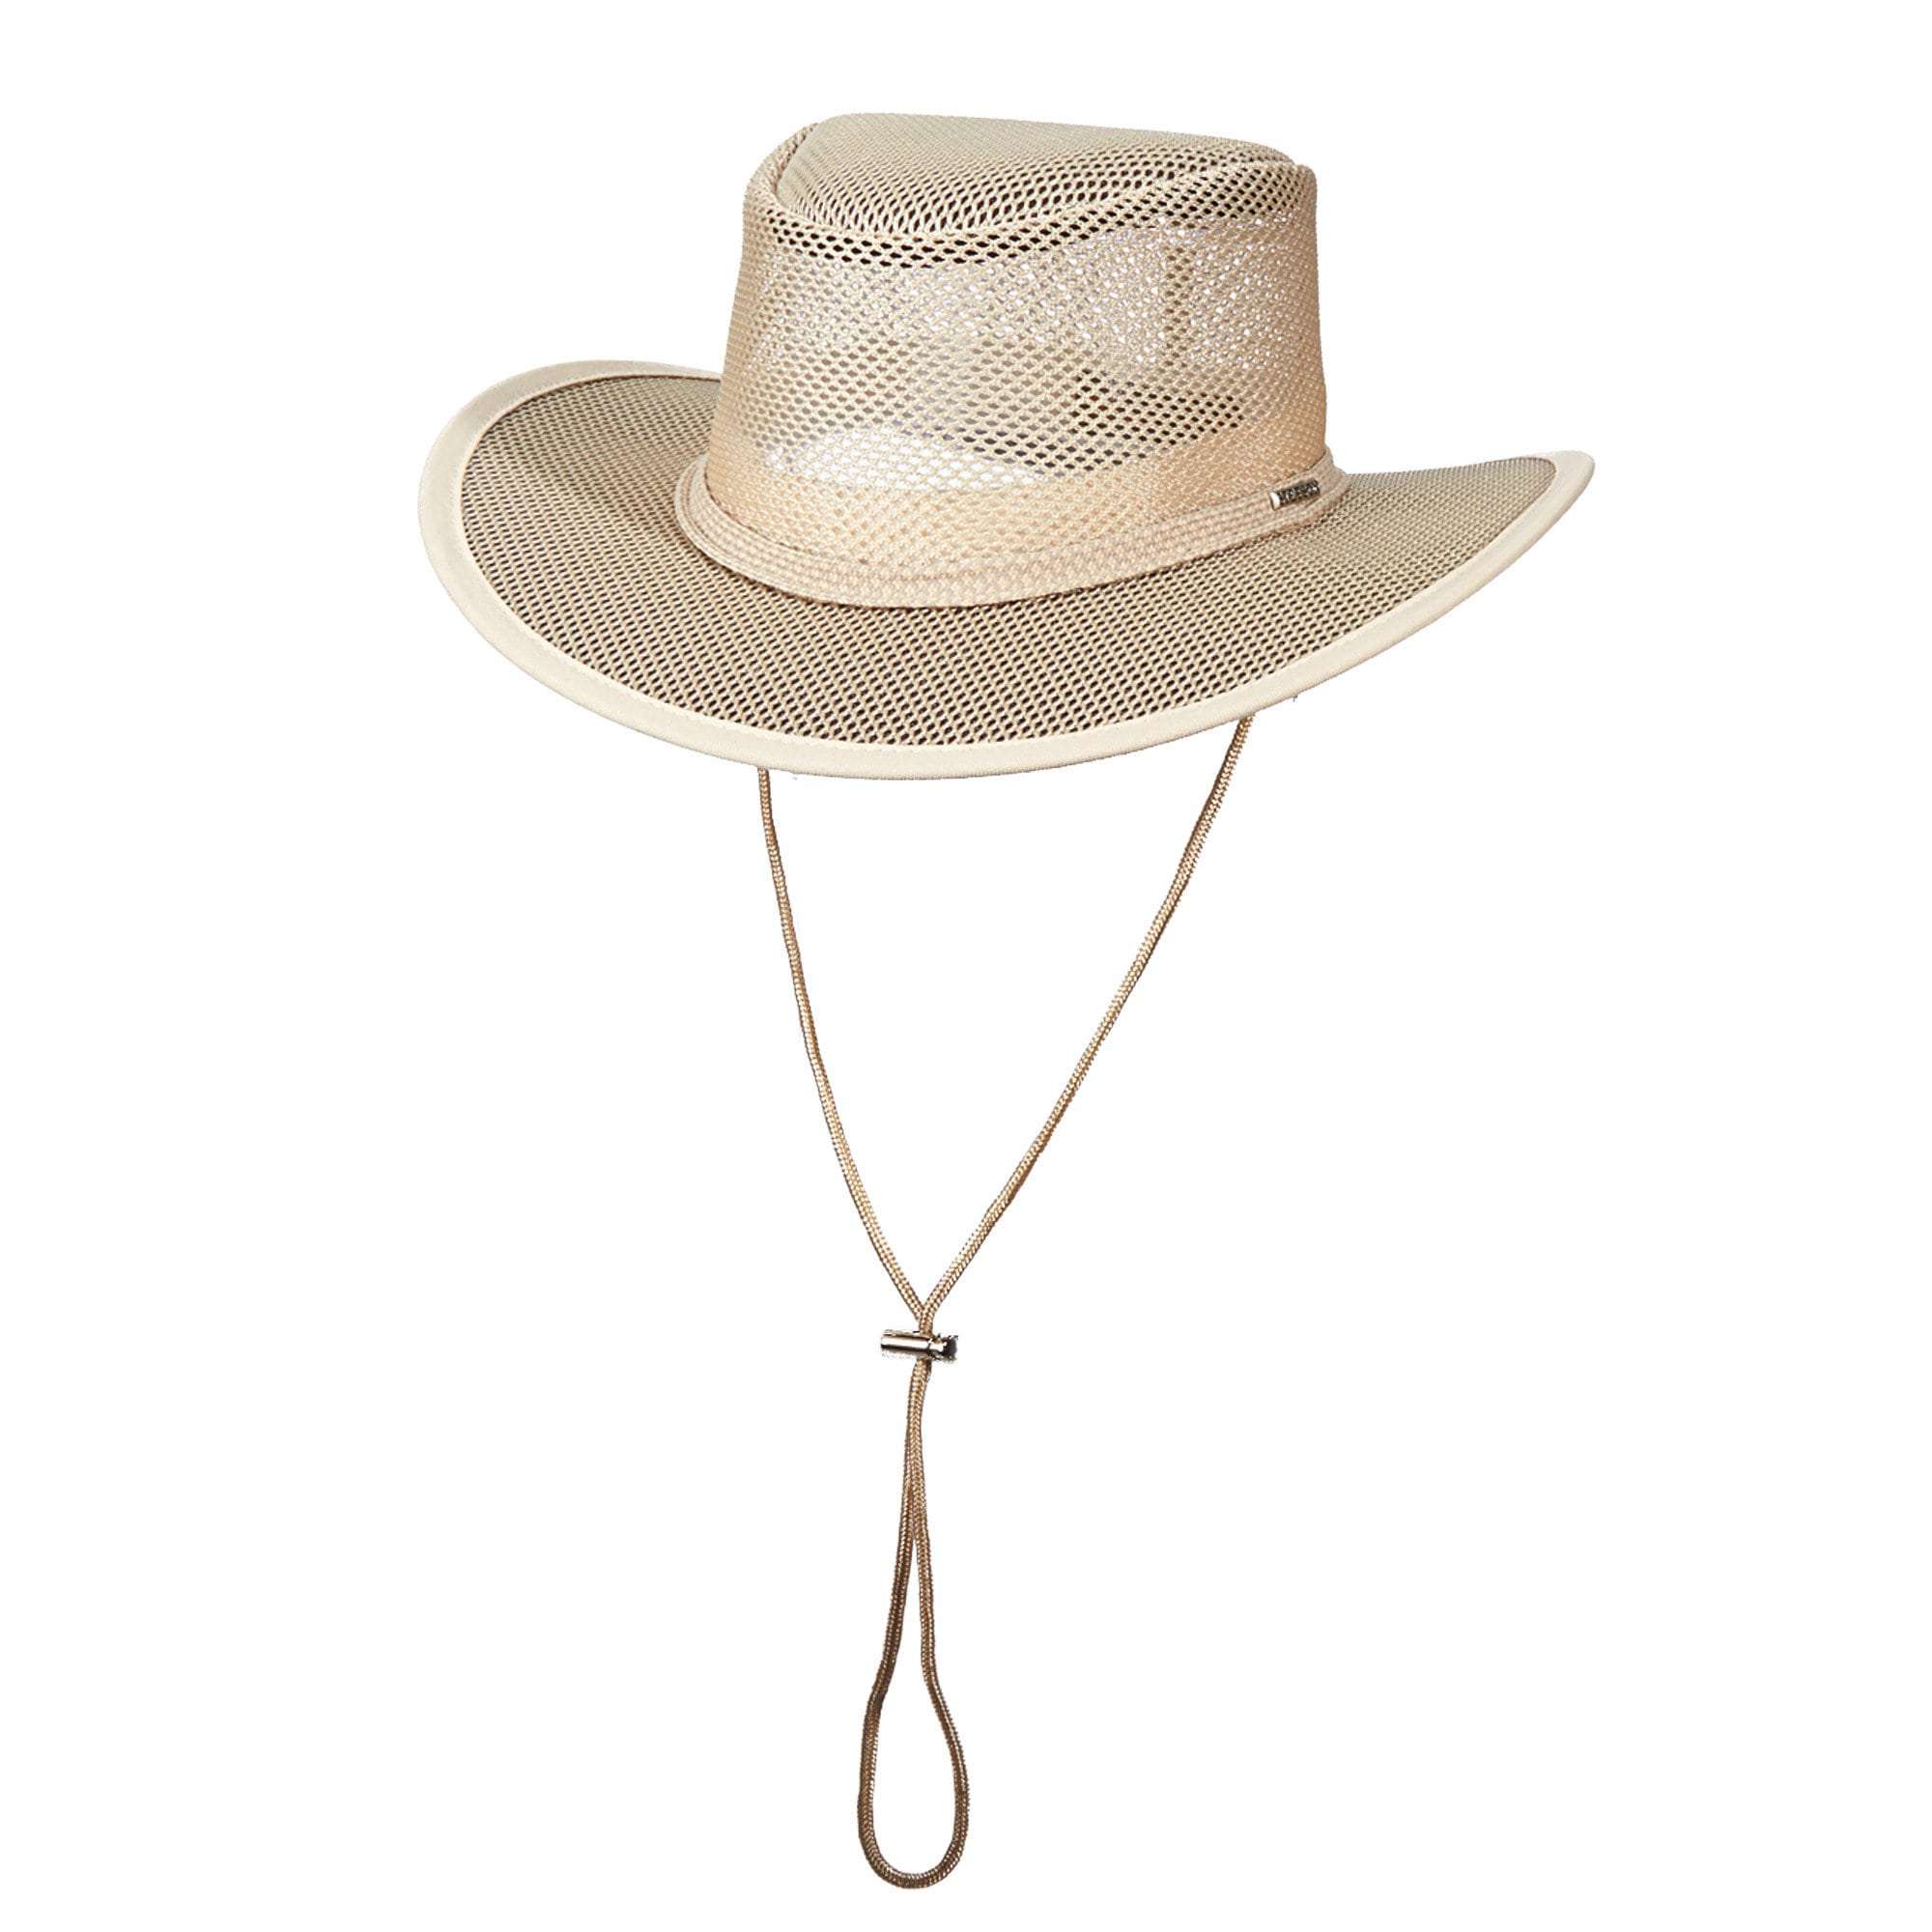 Stetson Hats Mesh Outback Hat for Men up to 2XL - Clay Safari Hat Stetson Hats STC205-CLAY1 Clay Small 